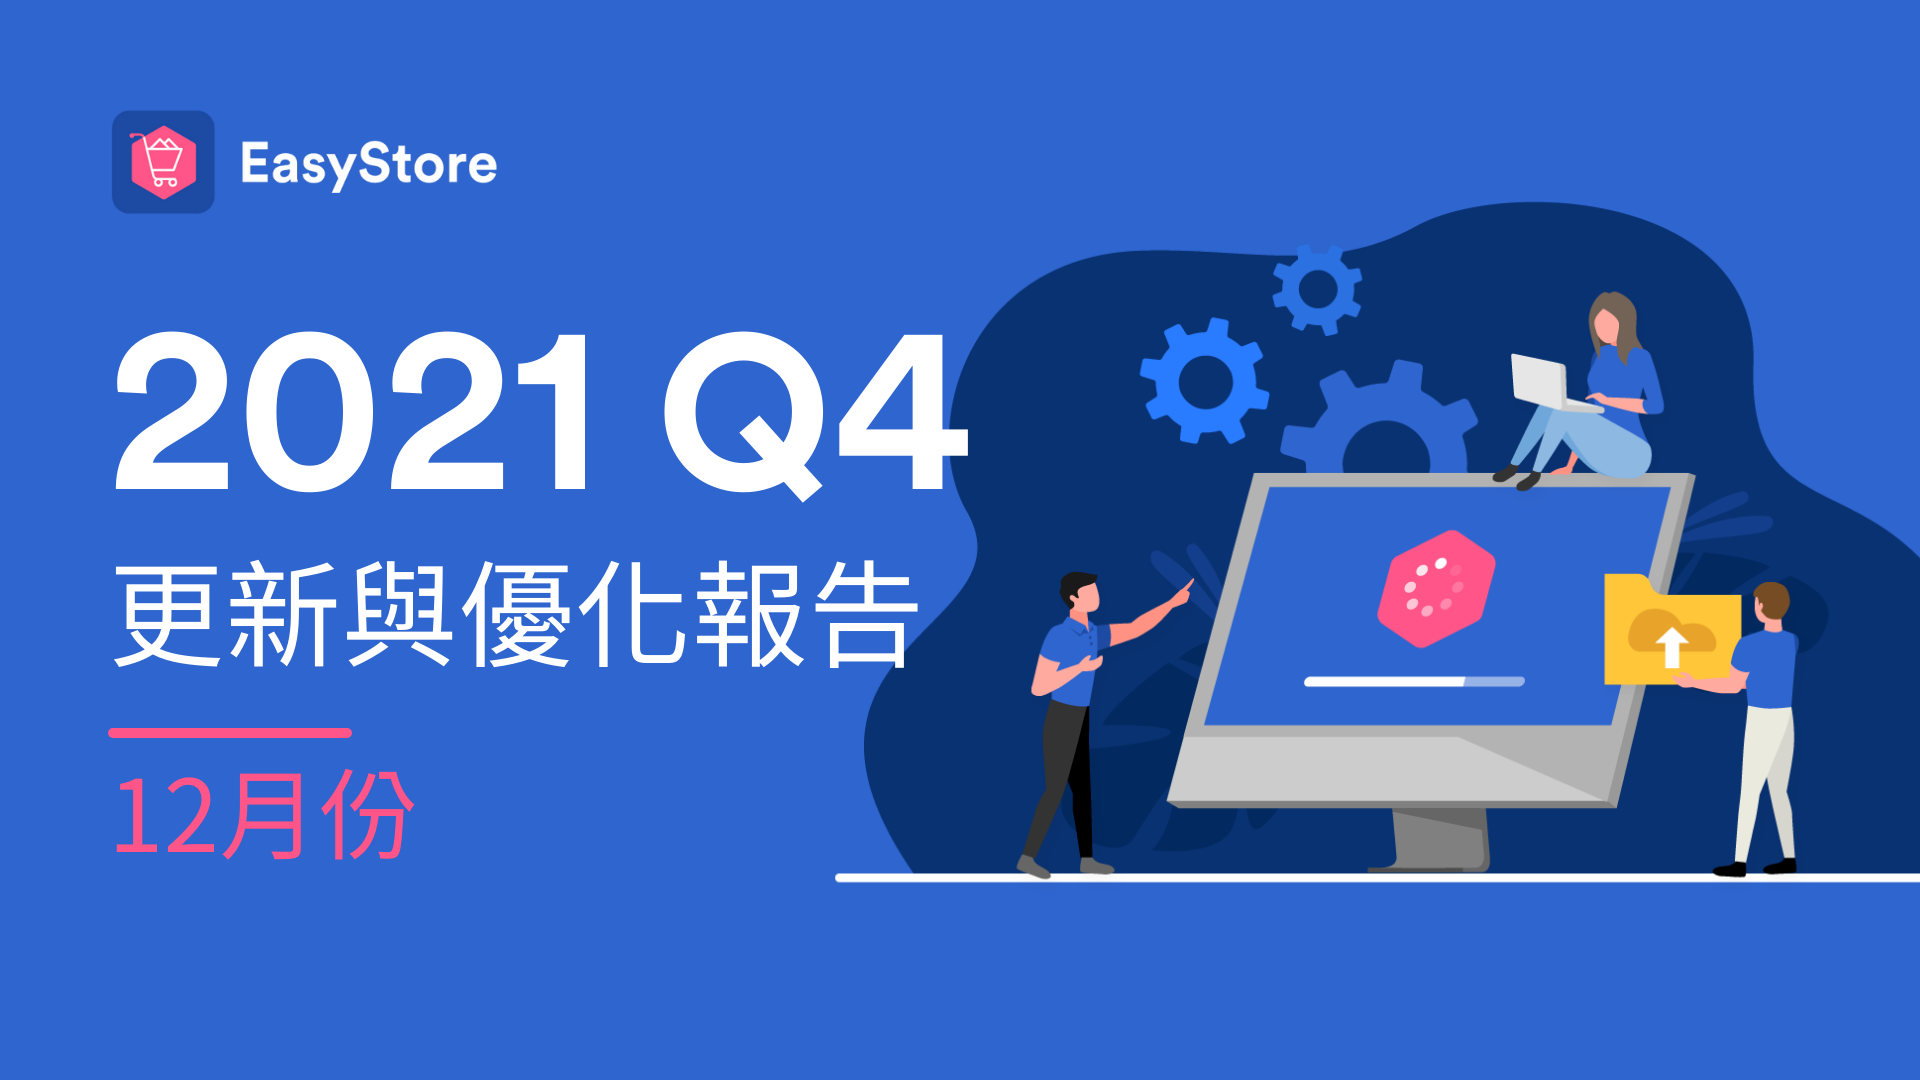 easystore-update-and-optimization-report-2021-q4-december